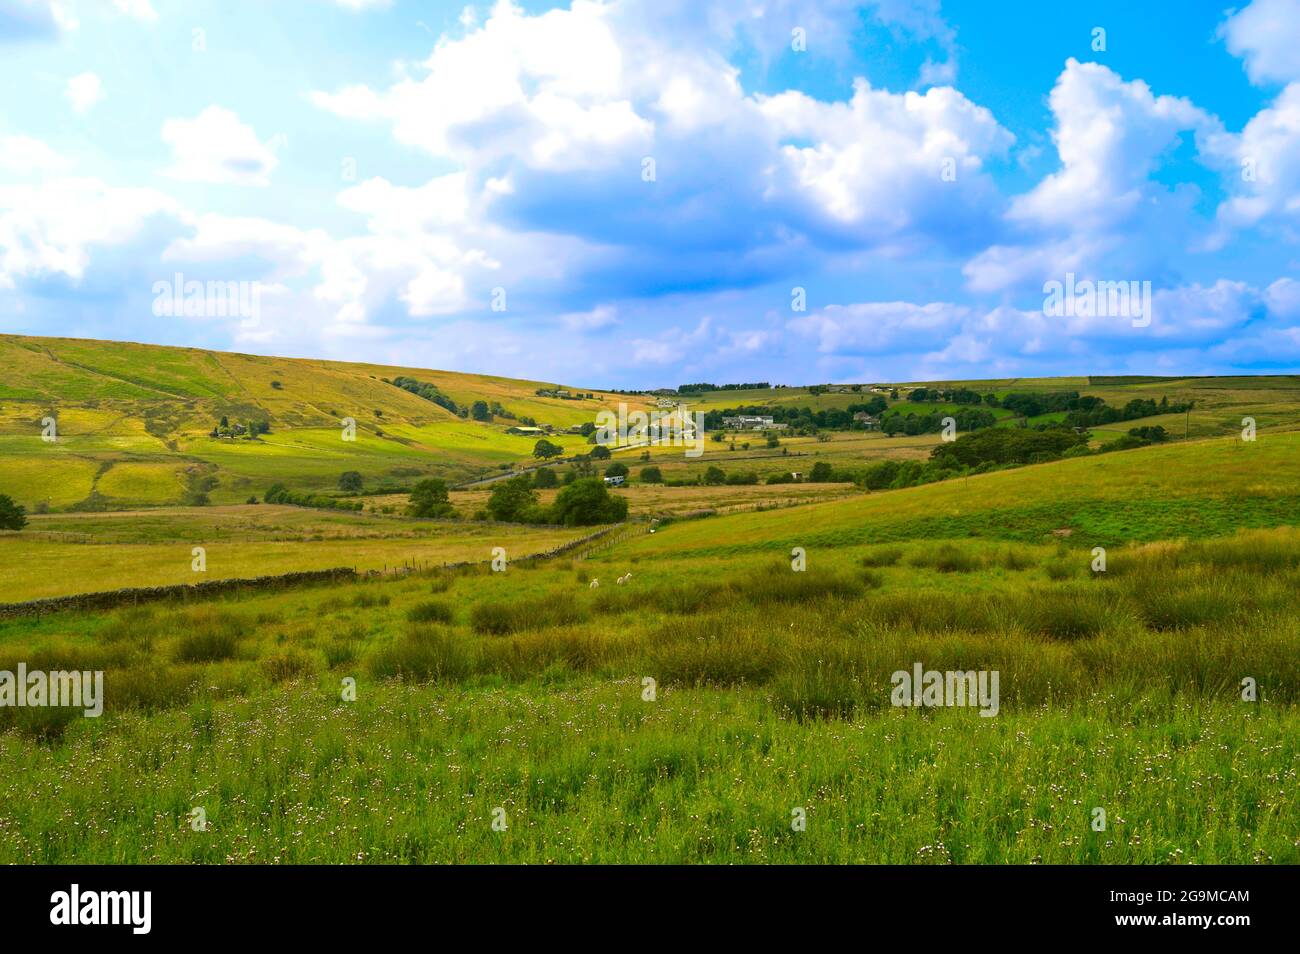 Castleshaw village houses in the heart of Saddleworth, Oldham in Greater Manchester Stock Photo